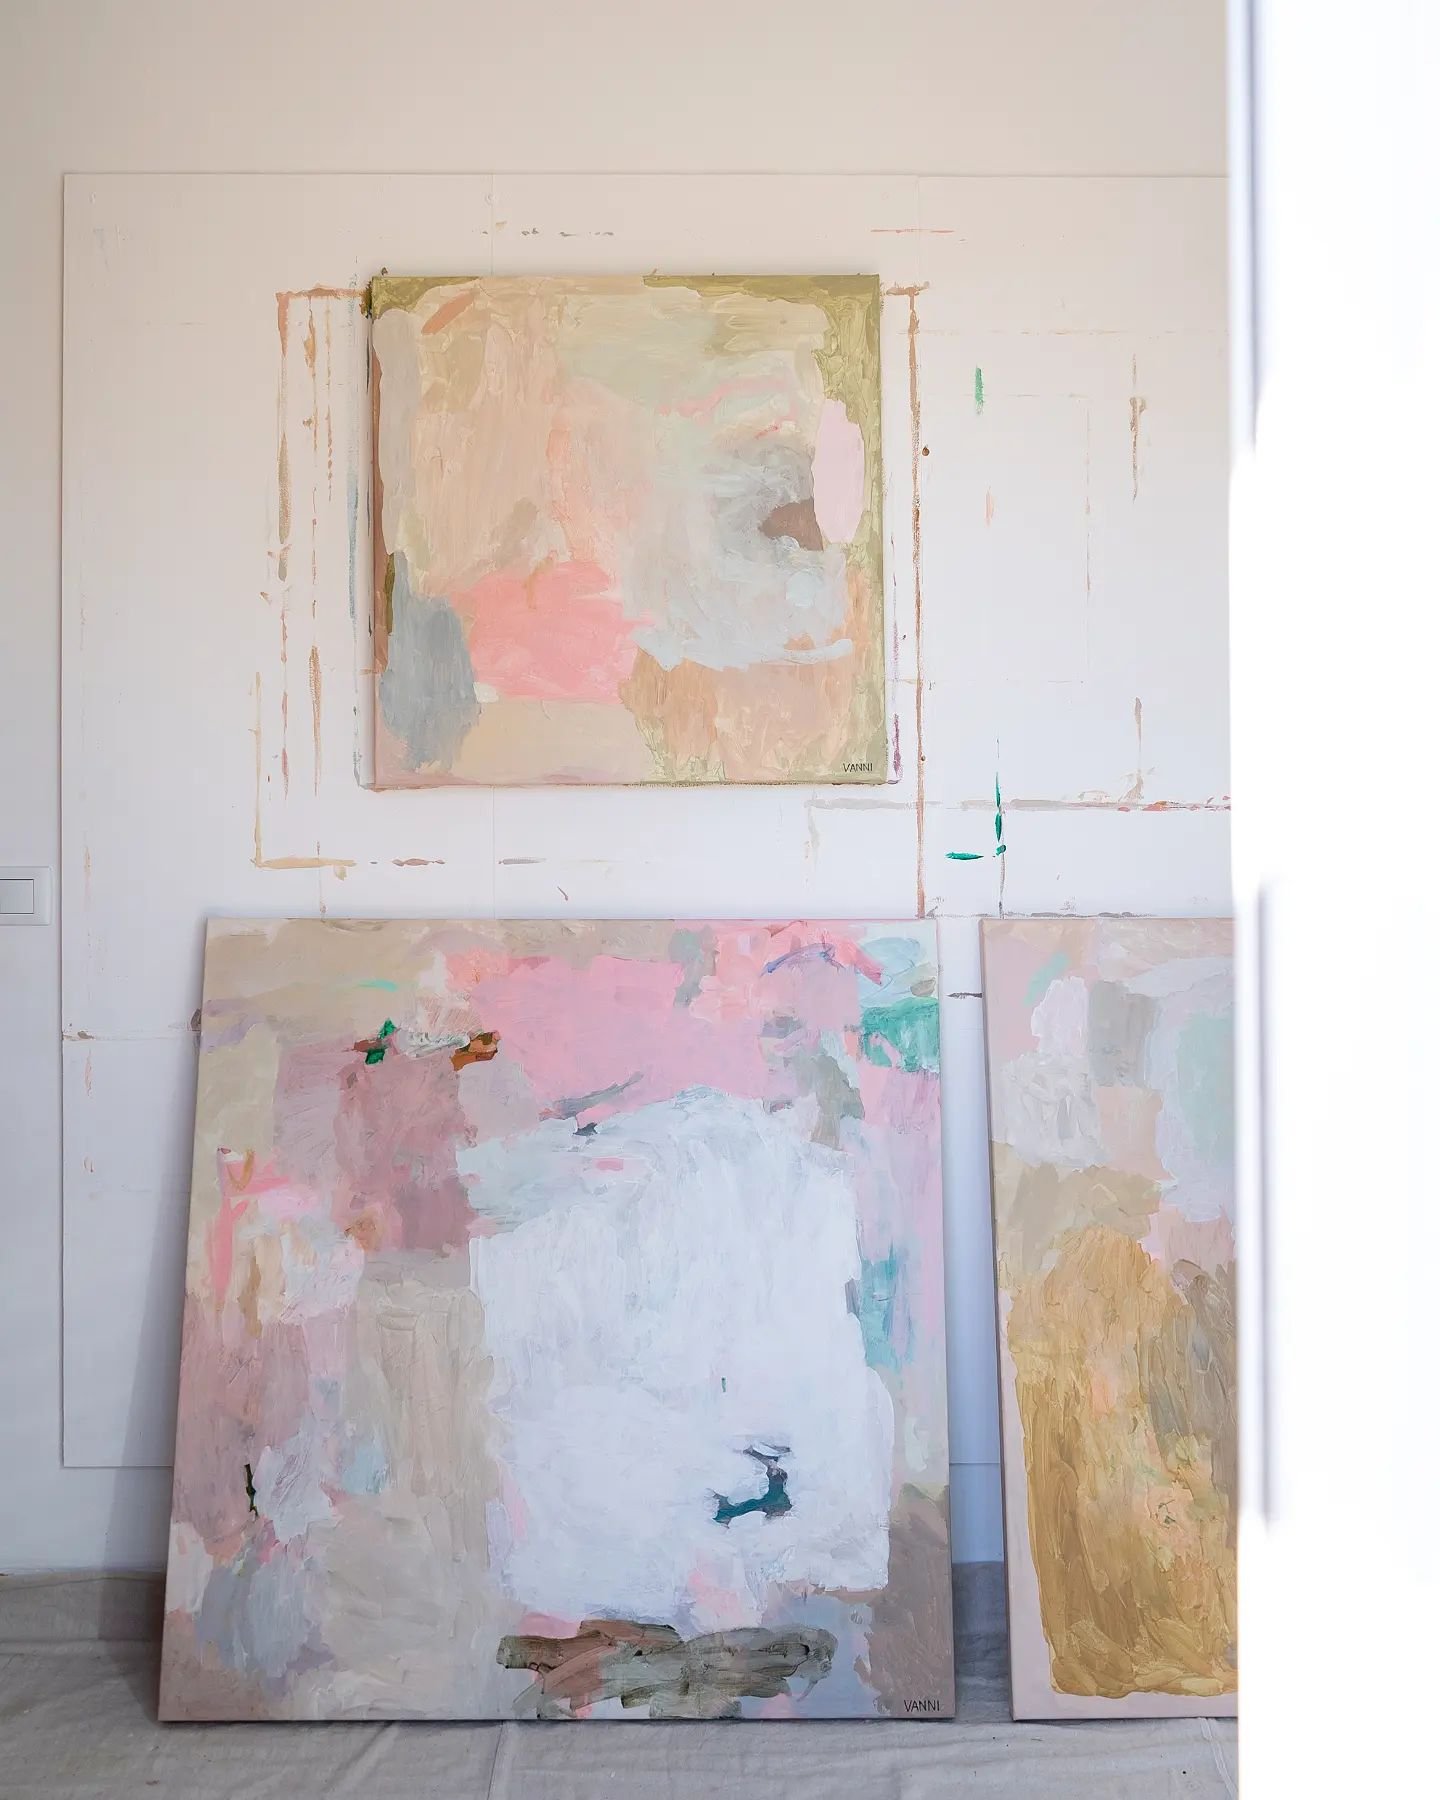 View into the studio from some time ago. 🤍

.

.

.

#studioview #softcolours #intuitiveart #abstractart #playfulabstracts #contemporaryart #pastelcolours #vanniart